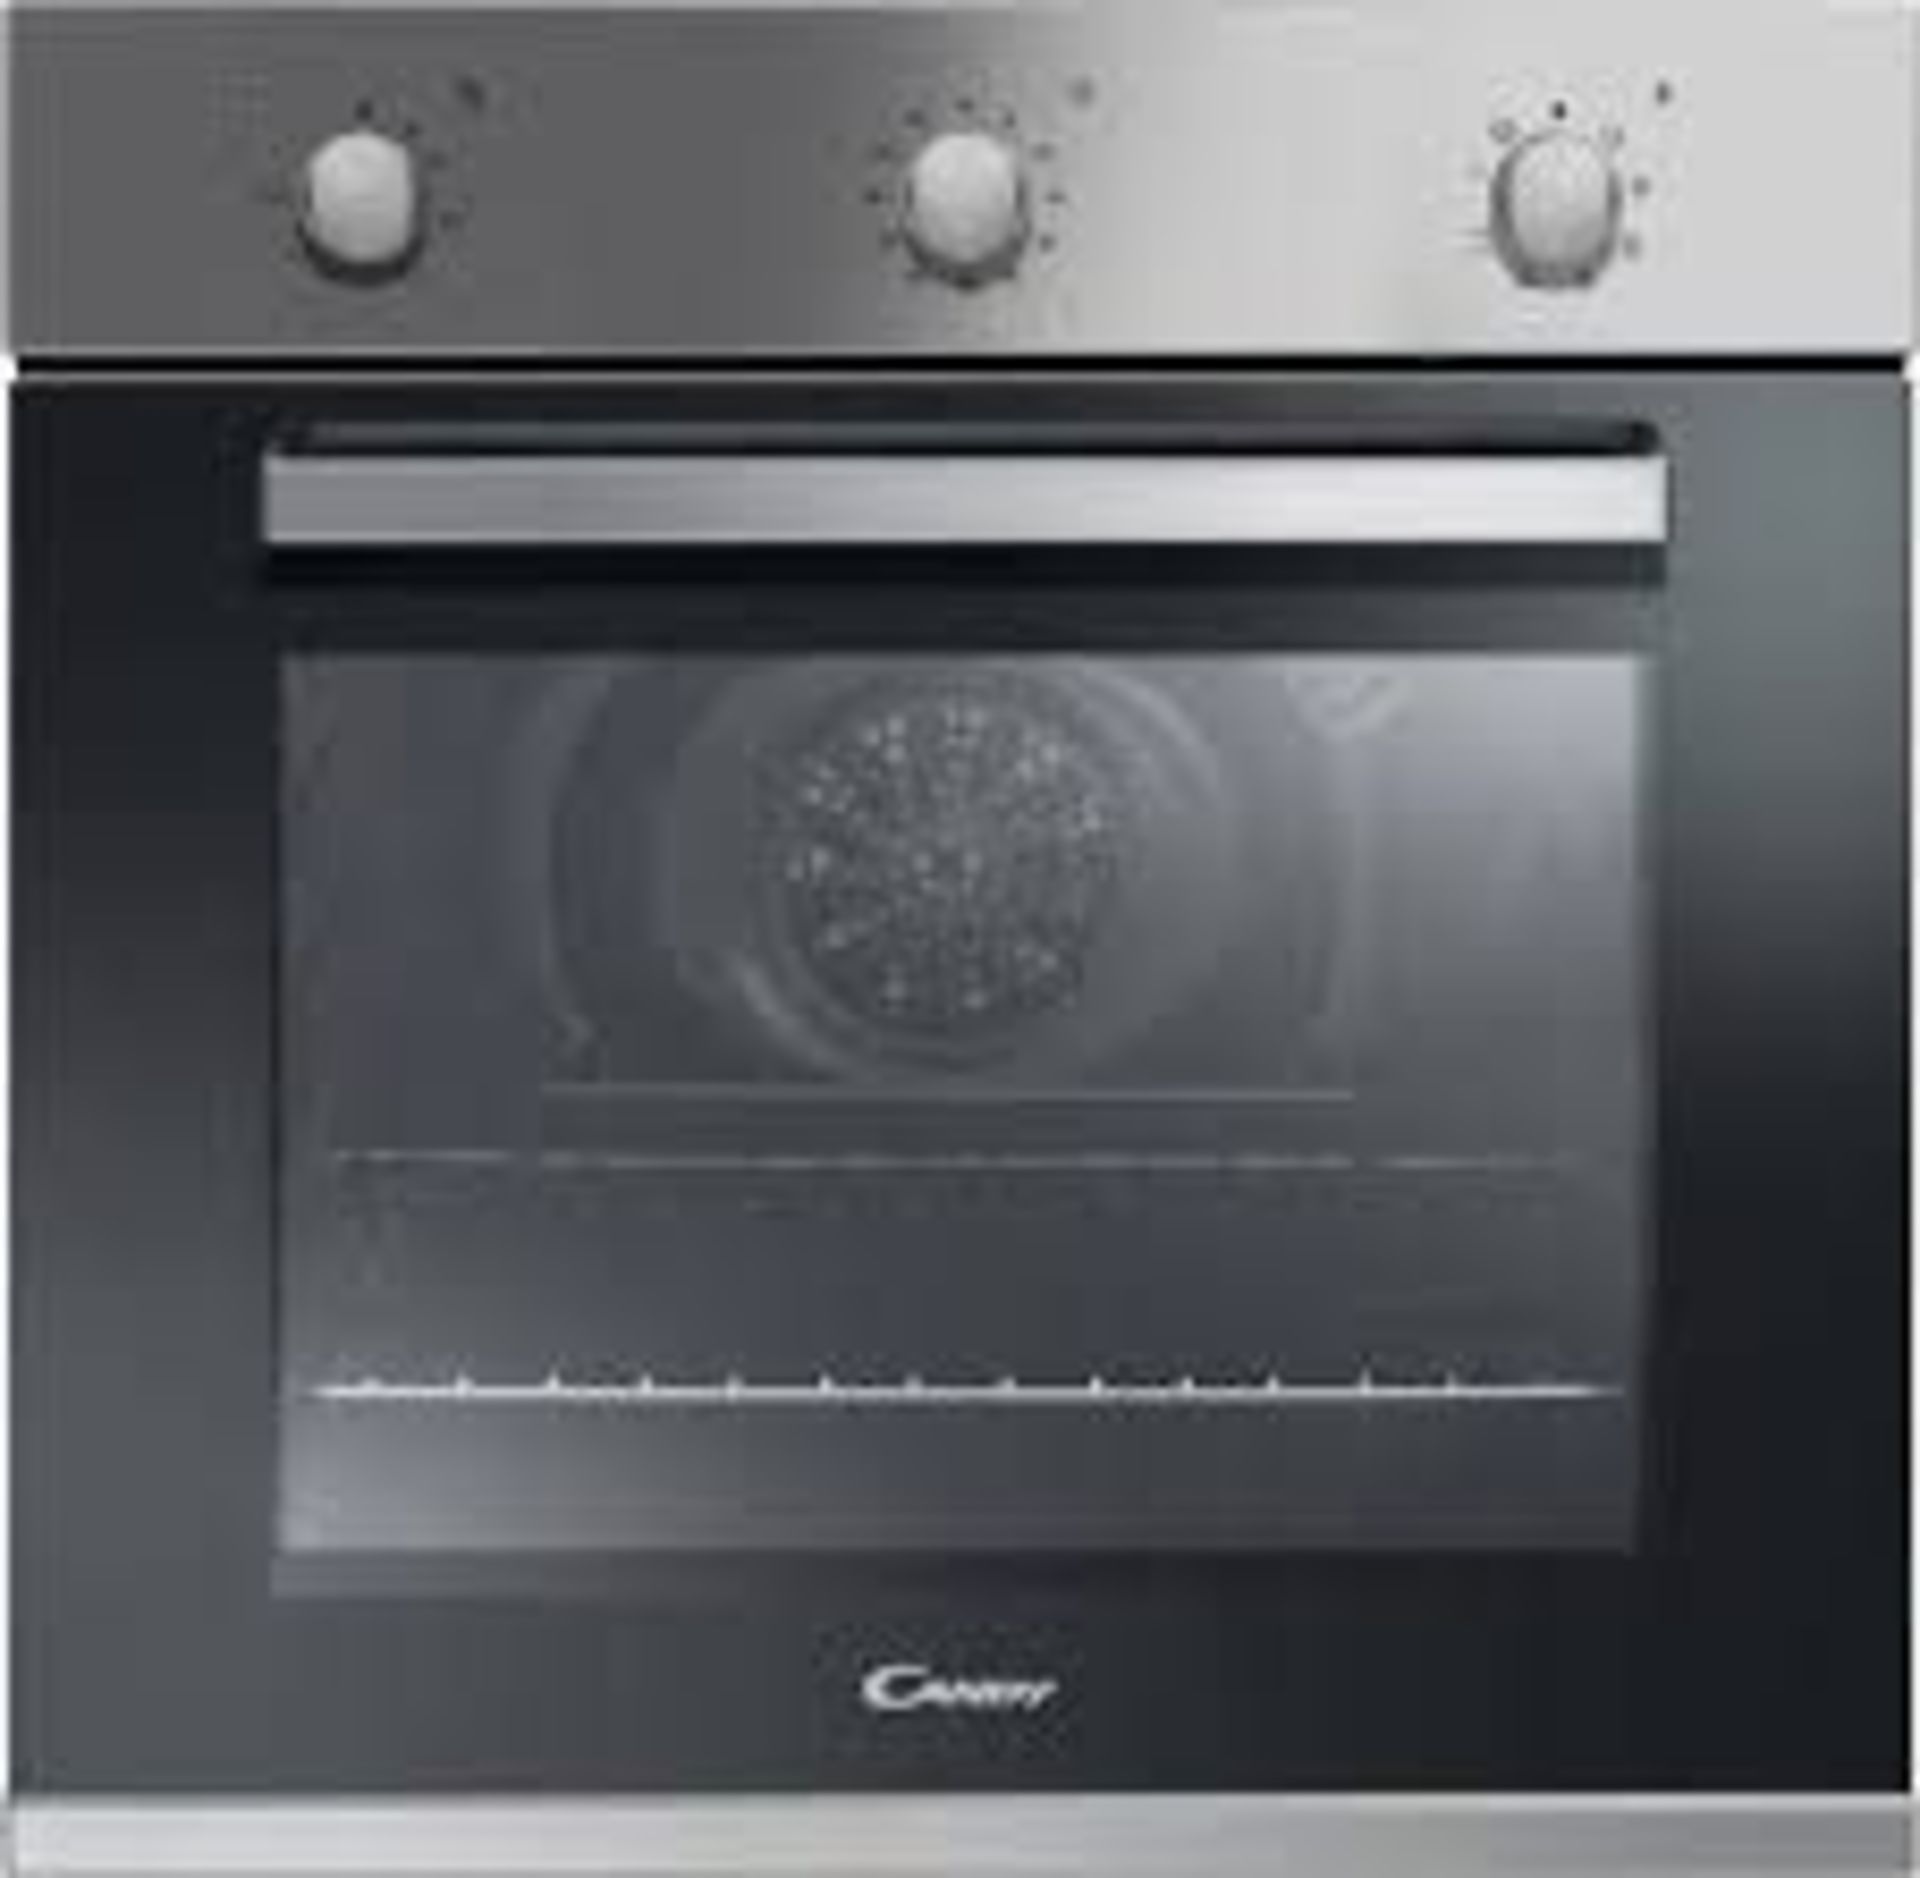 Candy FCP602X E0/E Built-in Single Oven - Black. - S2. RRP £310.00. This 60cm multifunction oven has